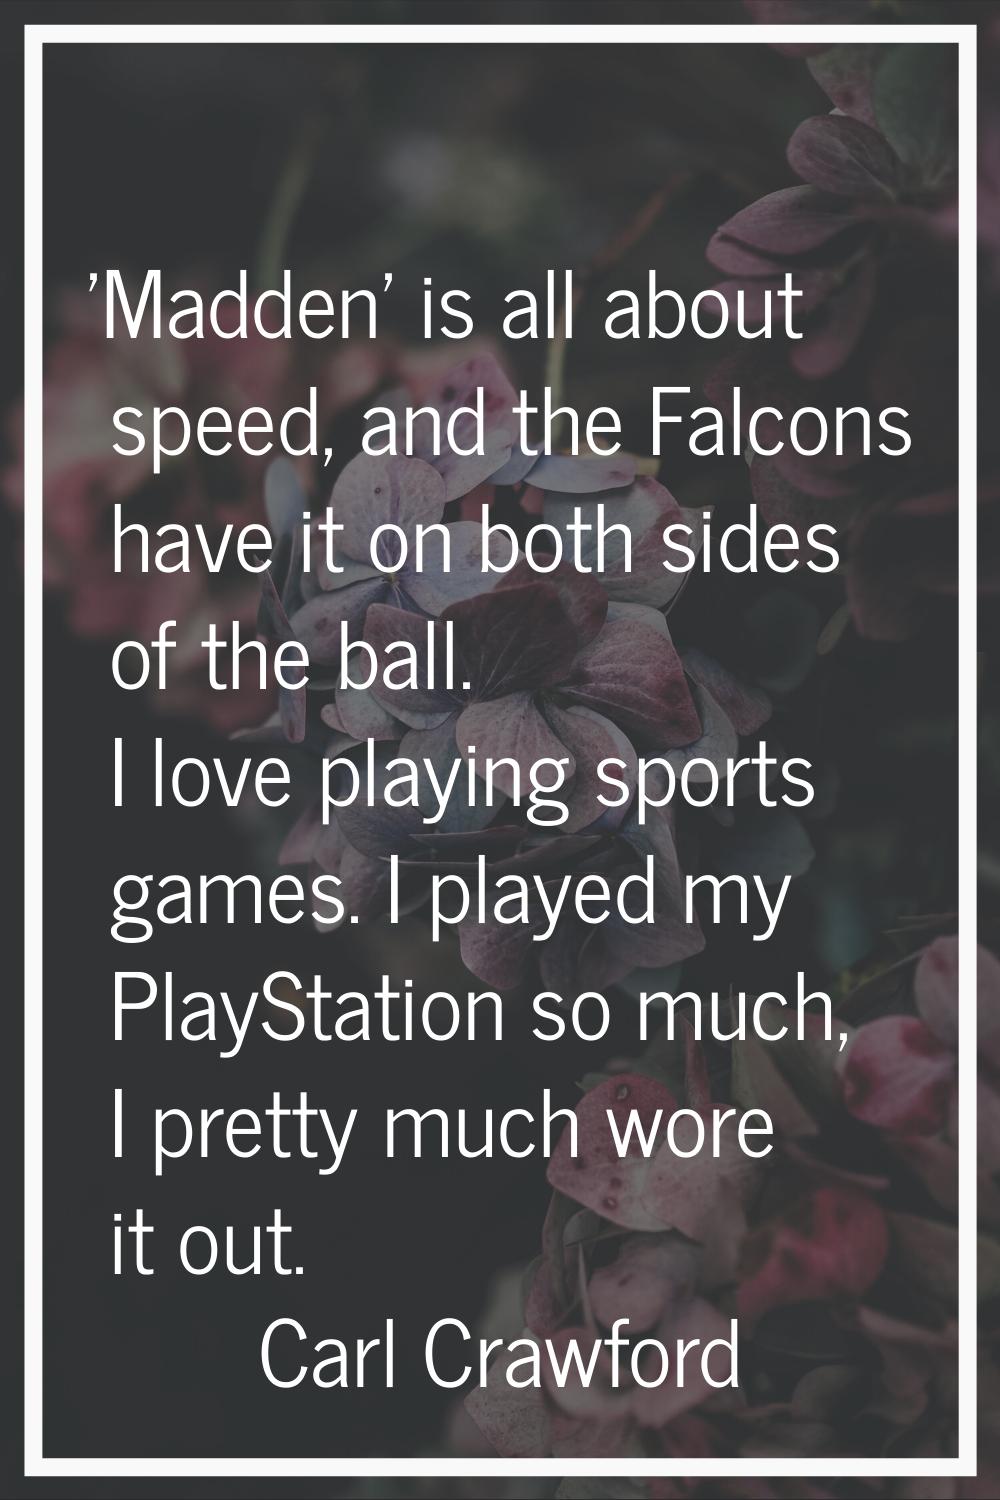 'Madden' is all about speed, and the Falcons have it on both sides of the ball. I love playing spor